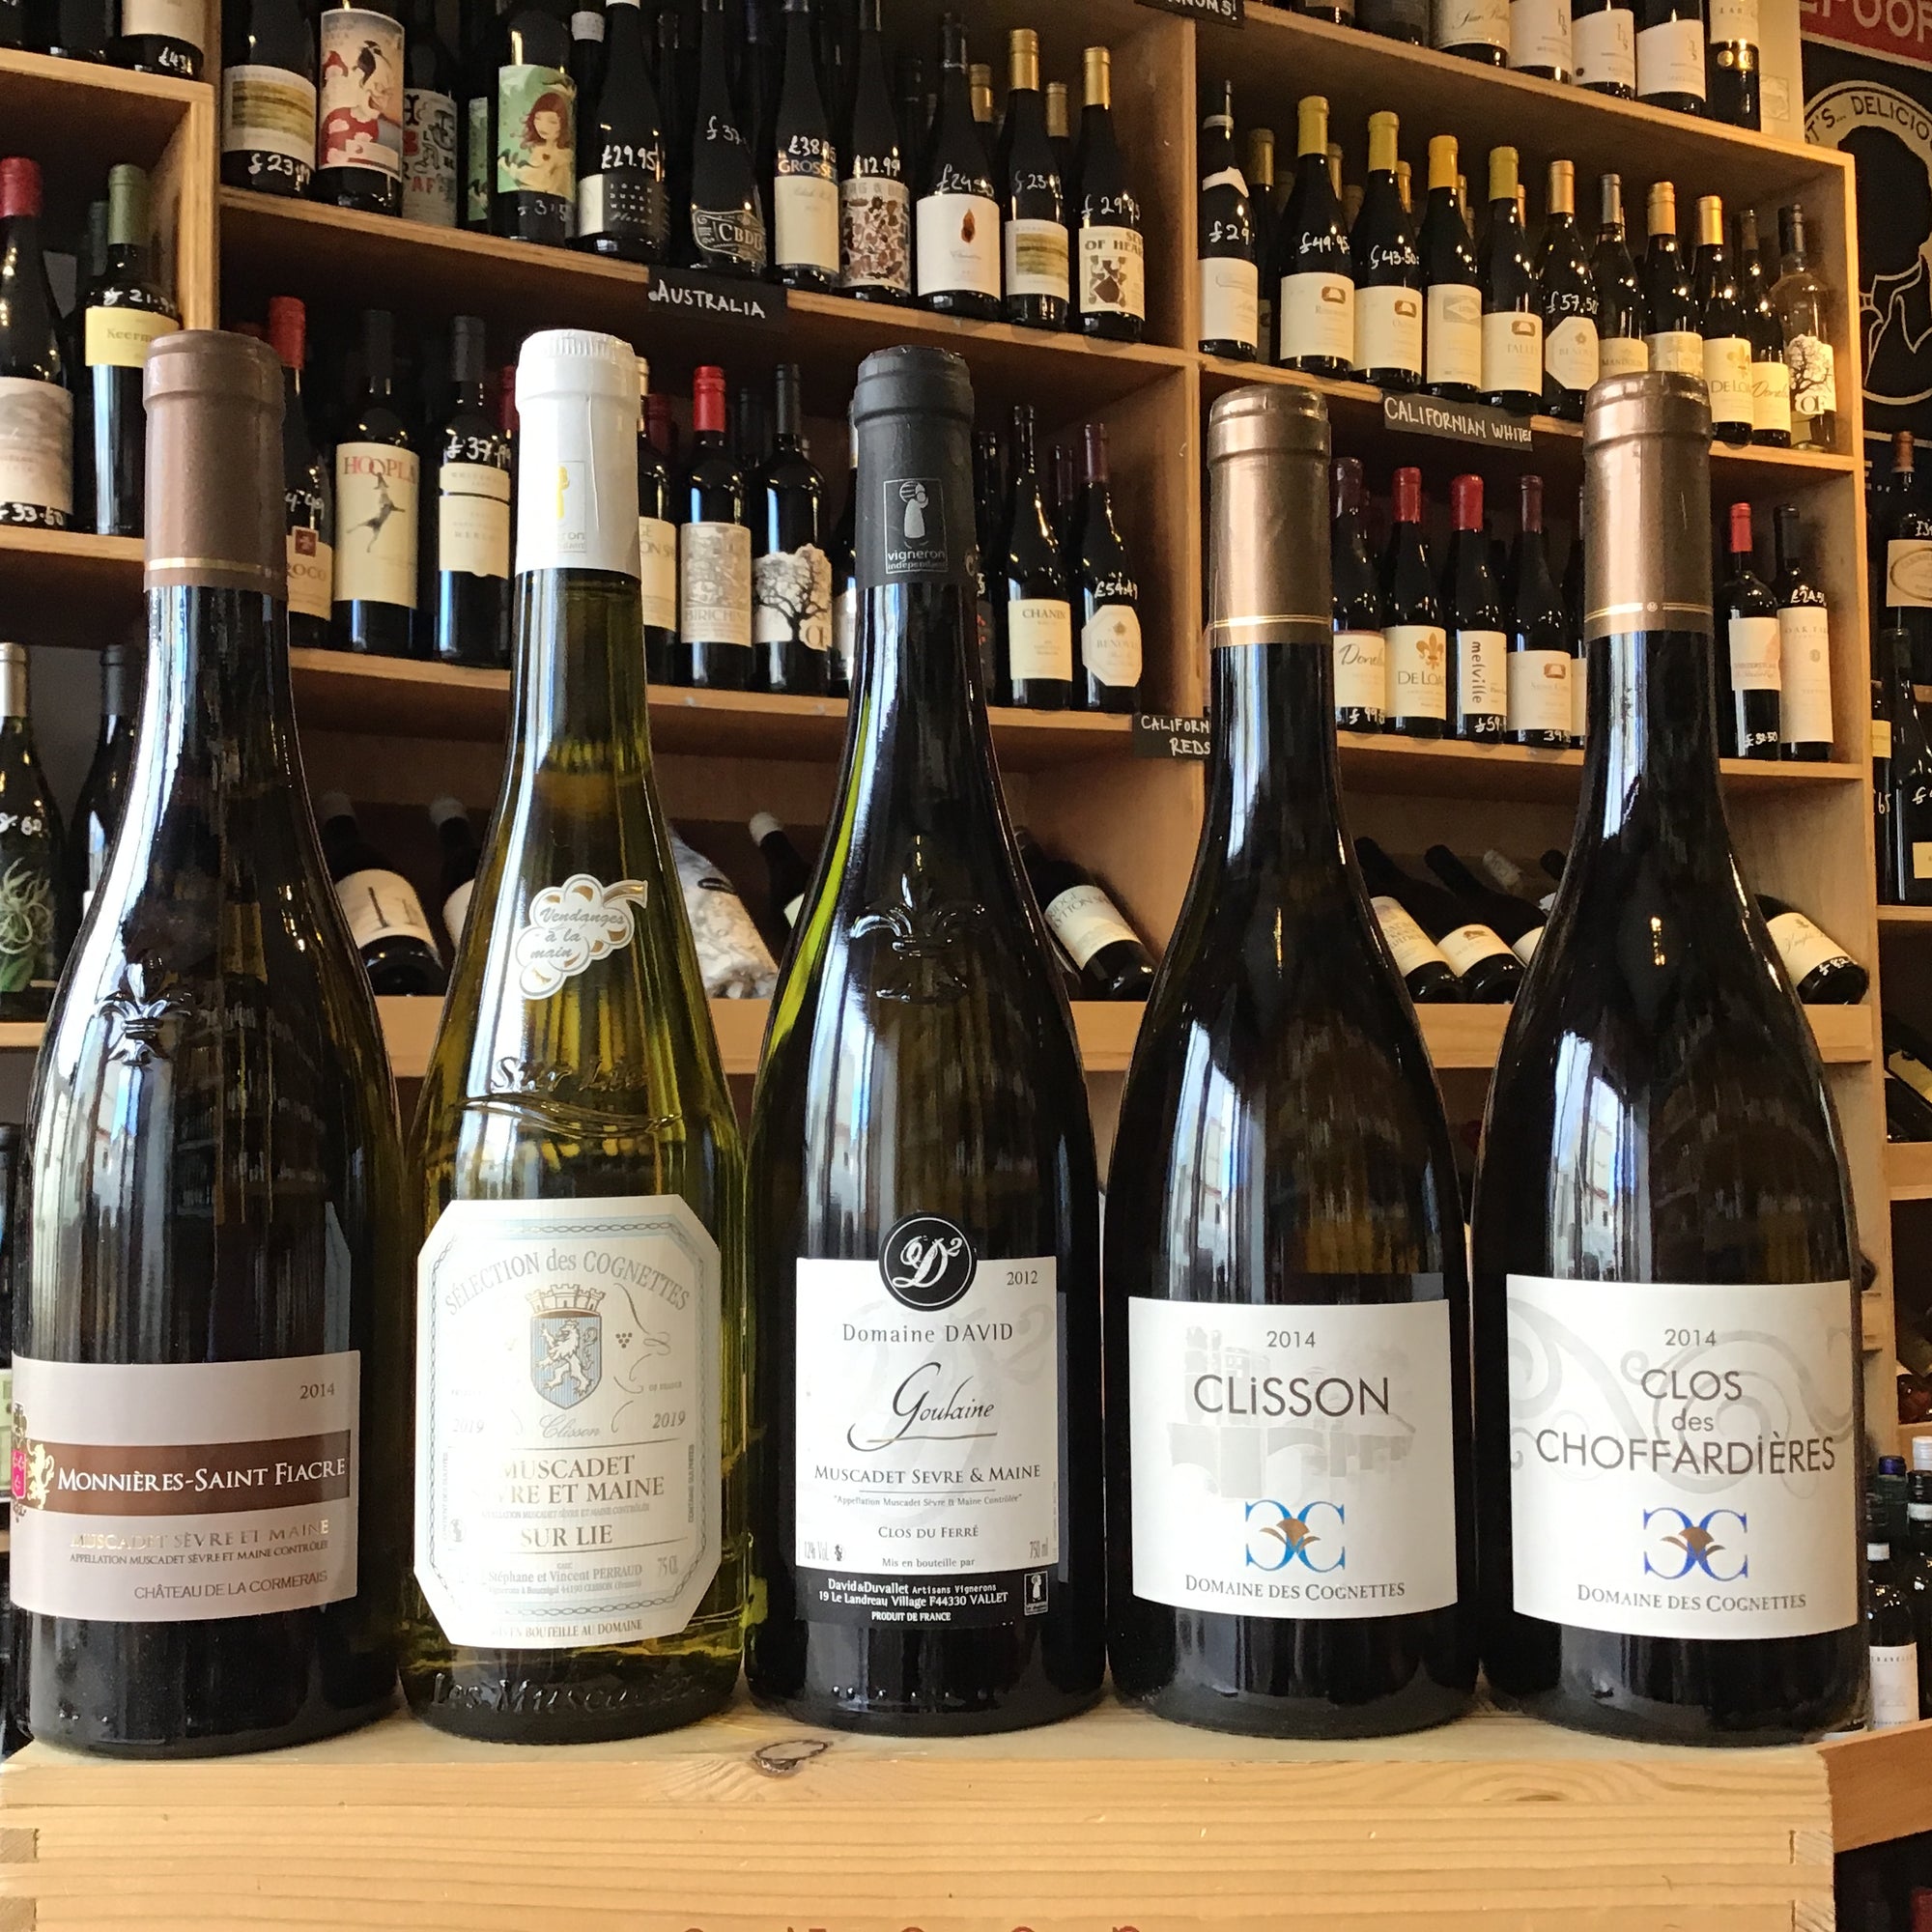 A selection of Muscadet Sevre et Maine Sur Lie wines available at Butler's Wine Cellar in Brighton